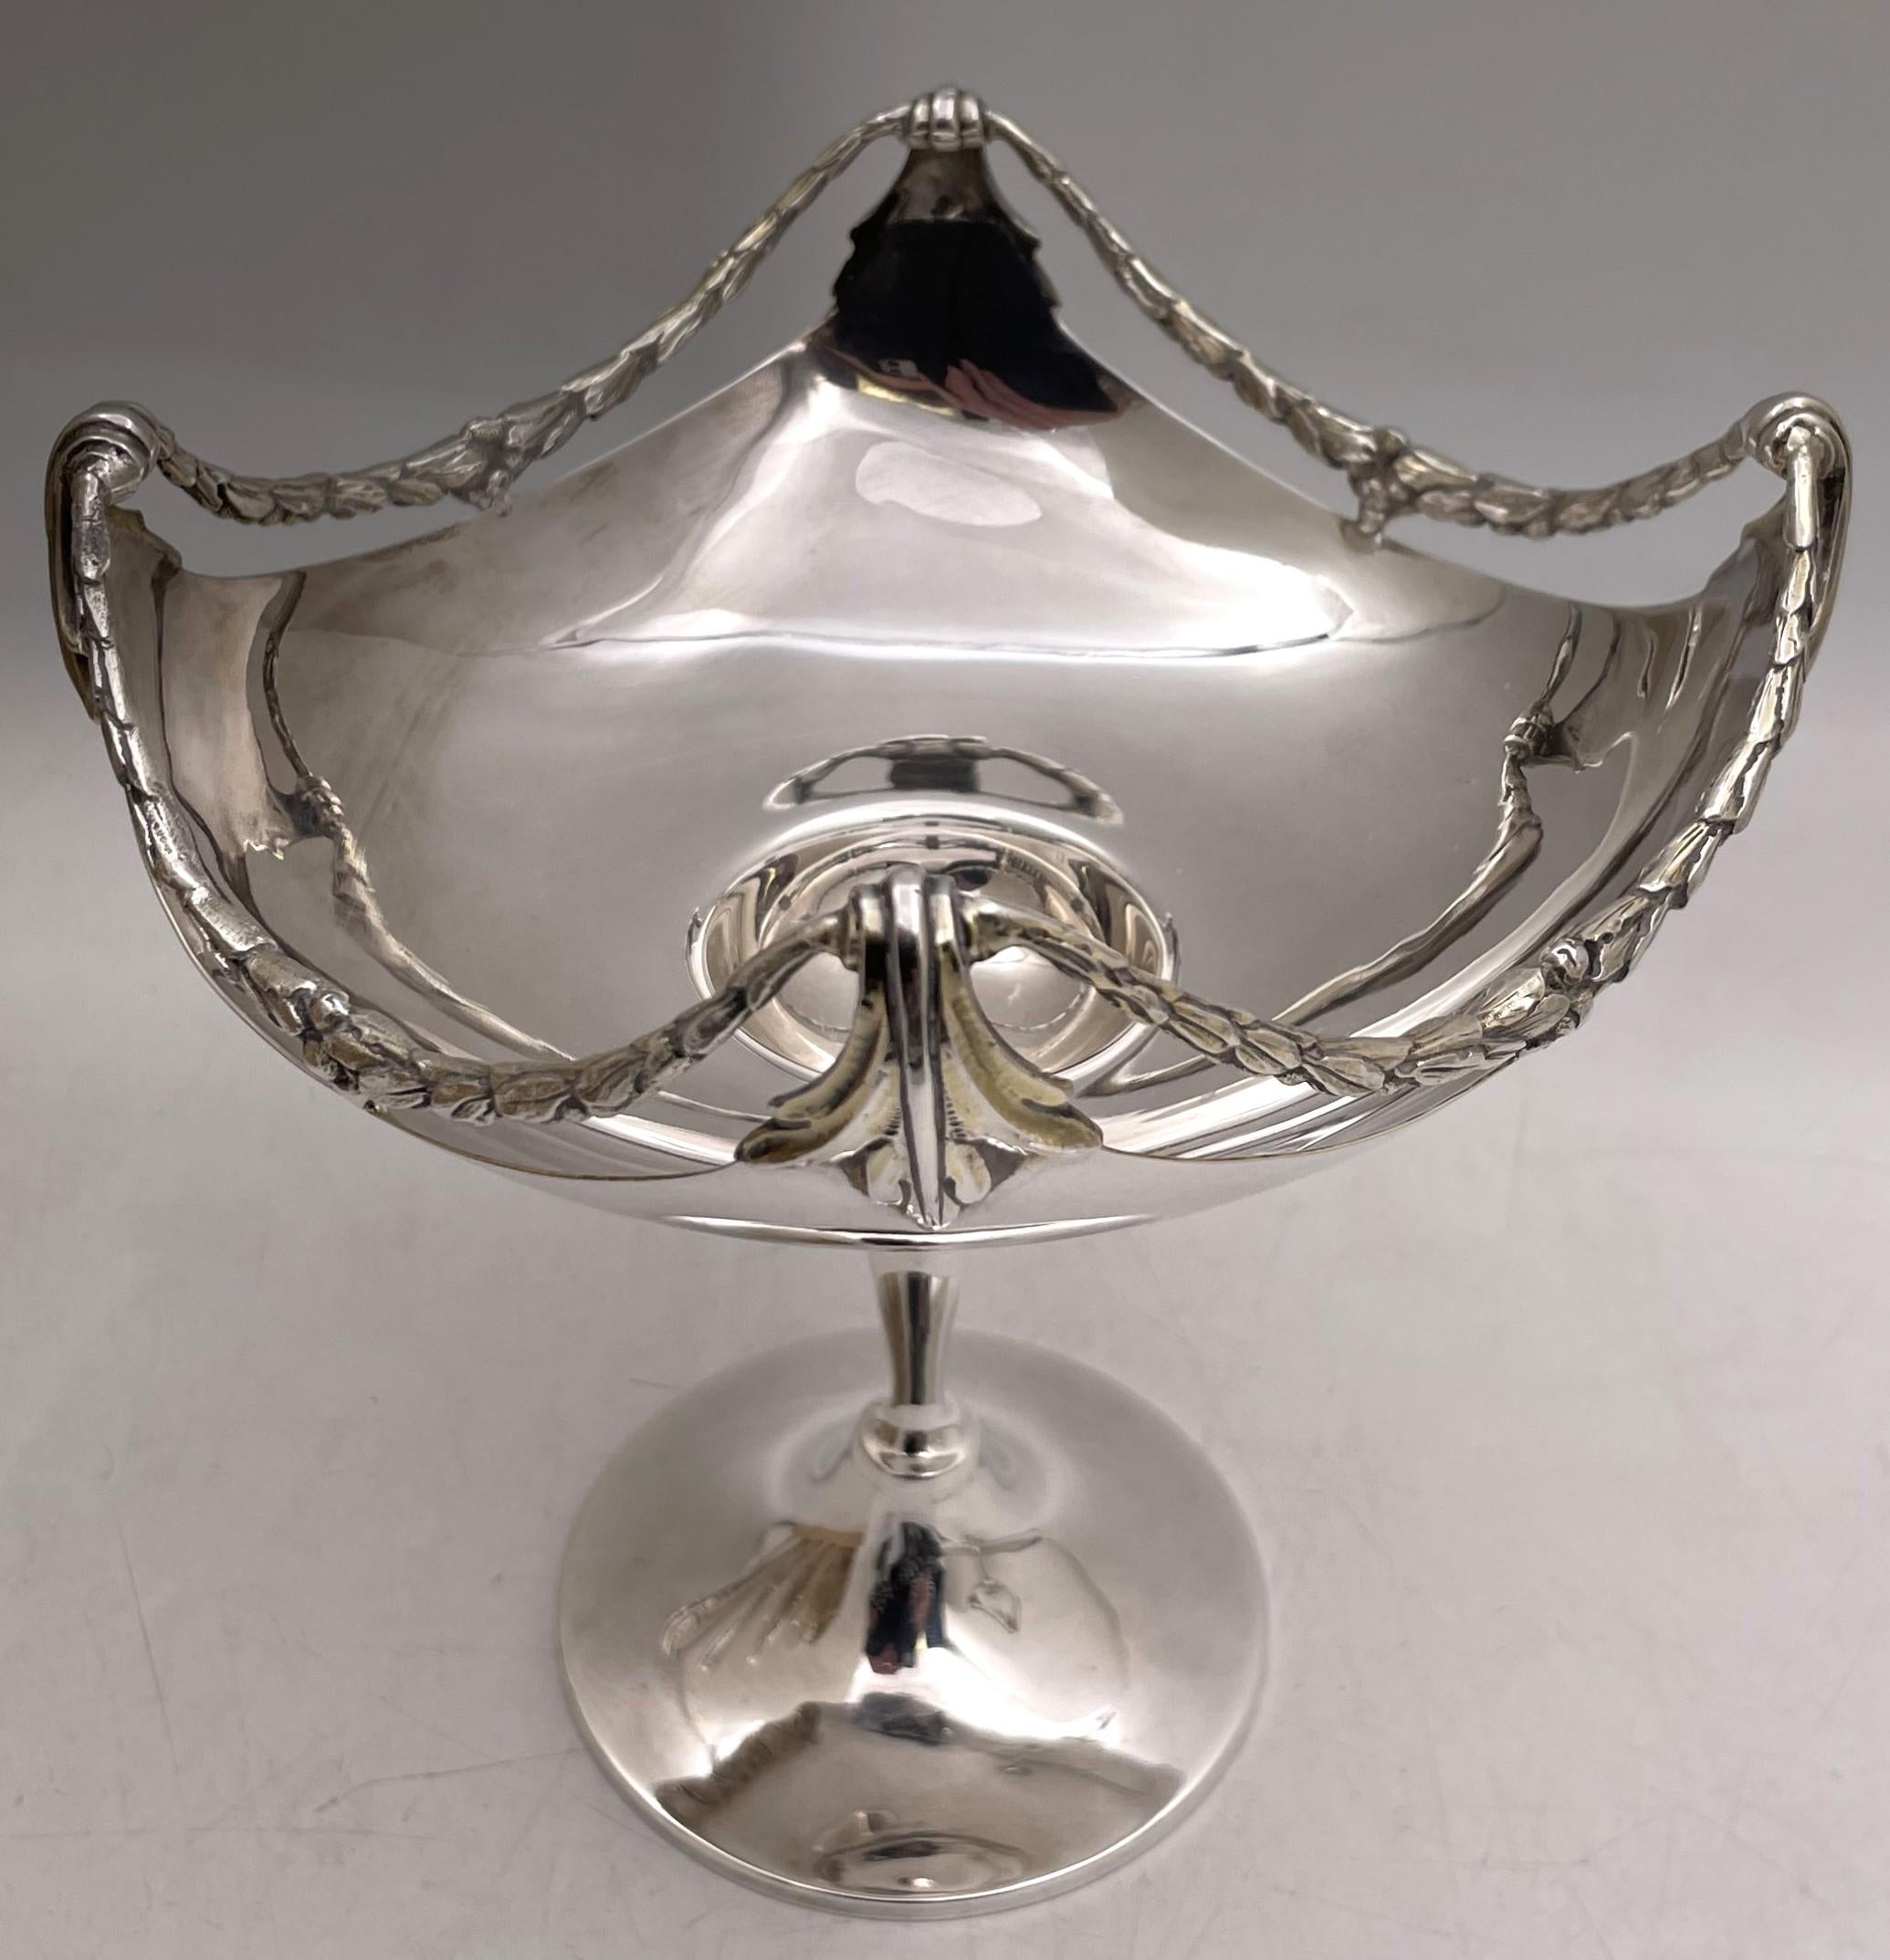 Pair of Goldsmiths & Silversmiths Sterling Silver 1910 Compotes or Footed Bowls In Good Condition For Sale In New York, NY